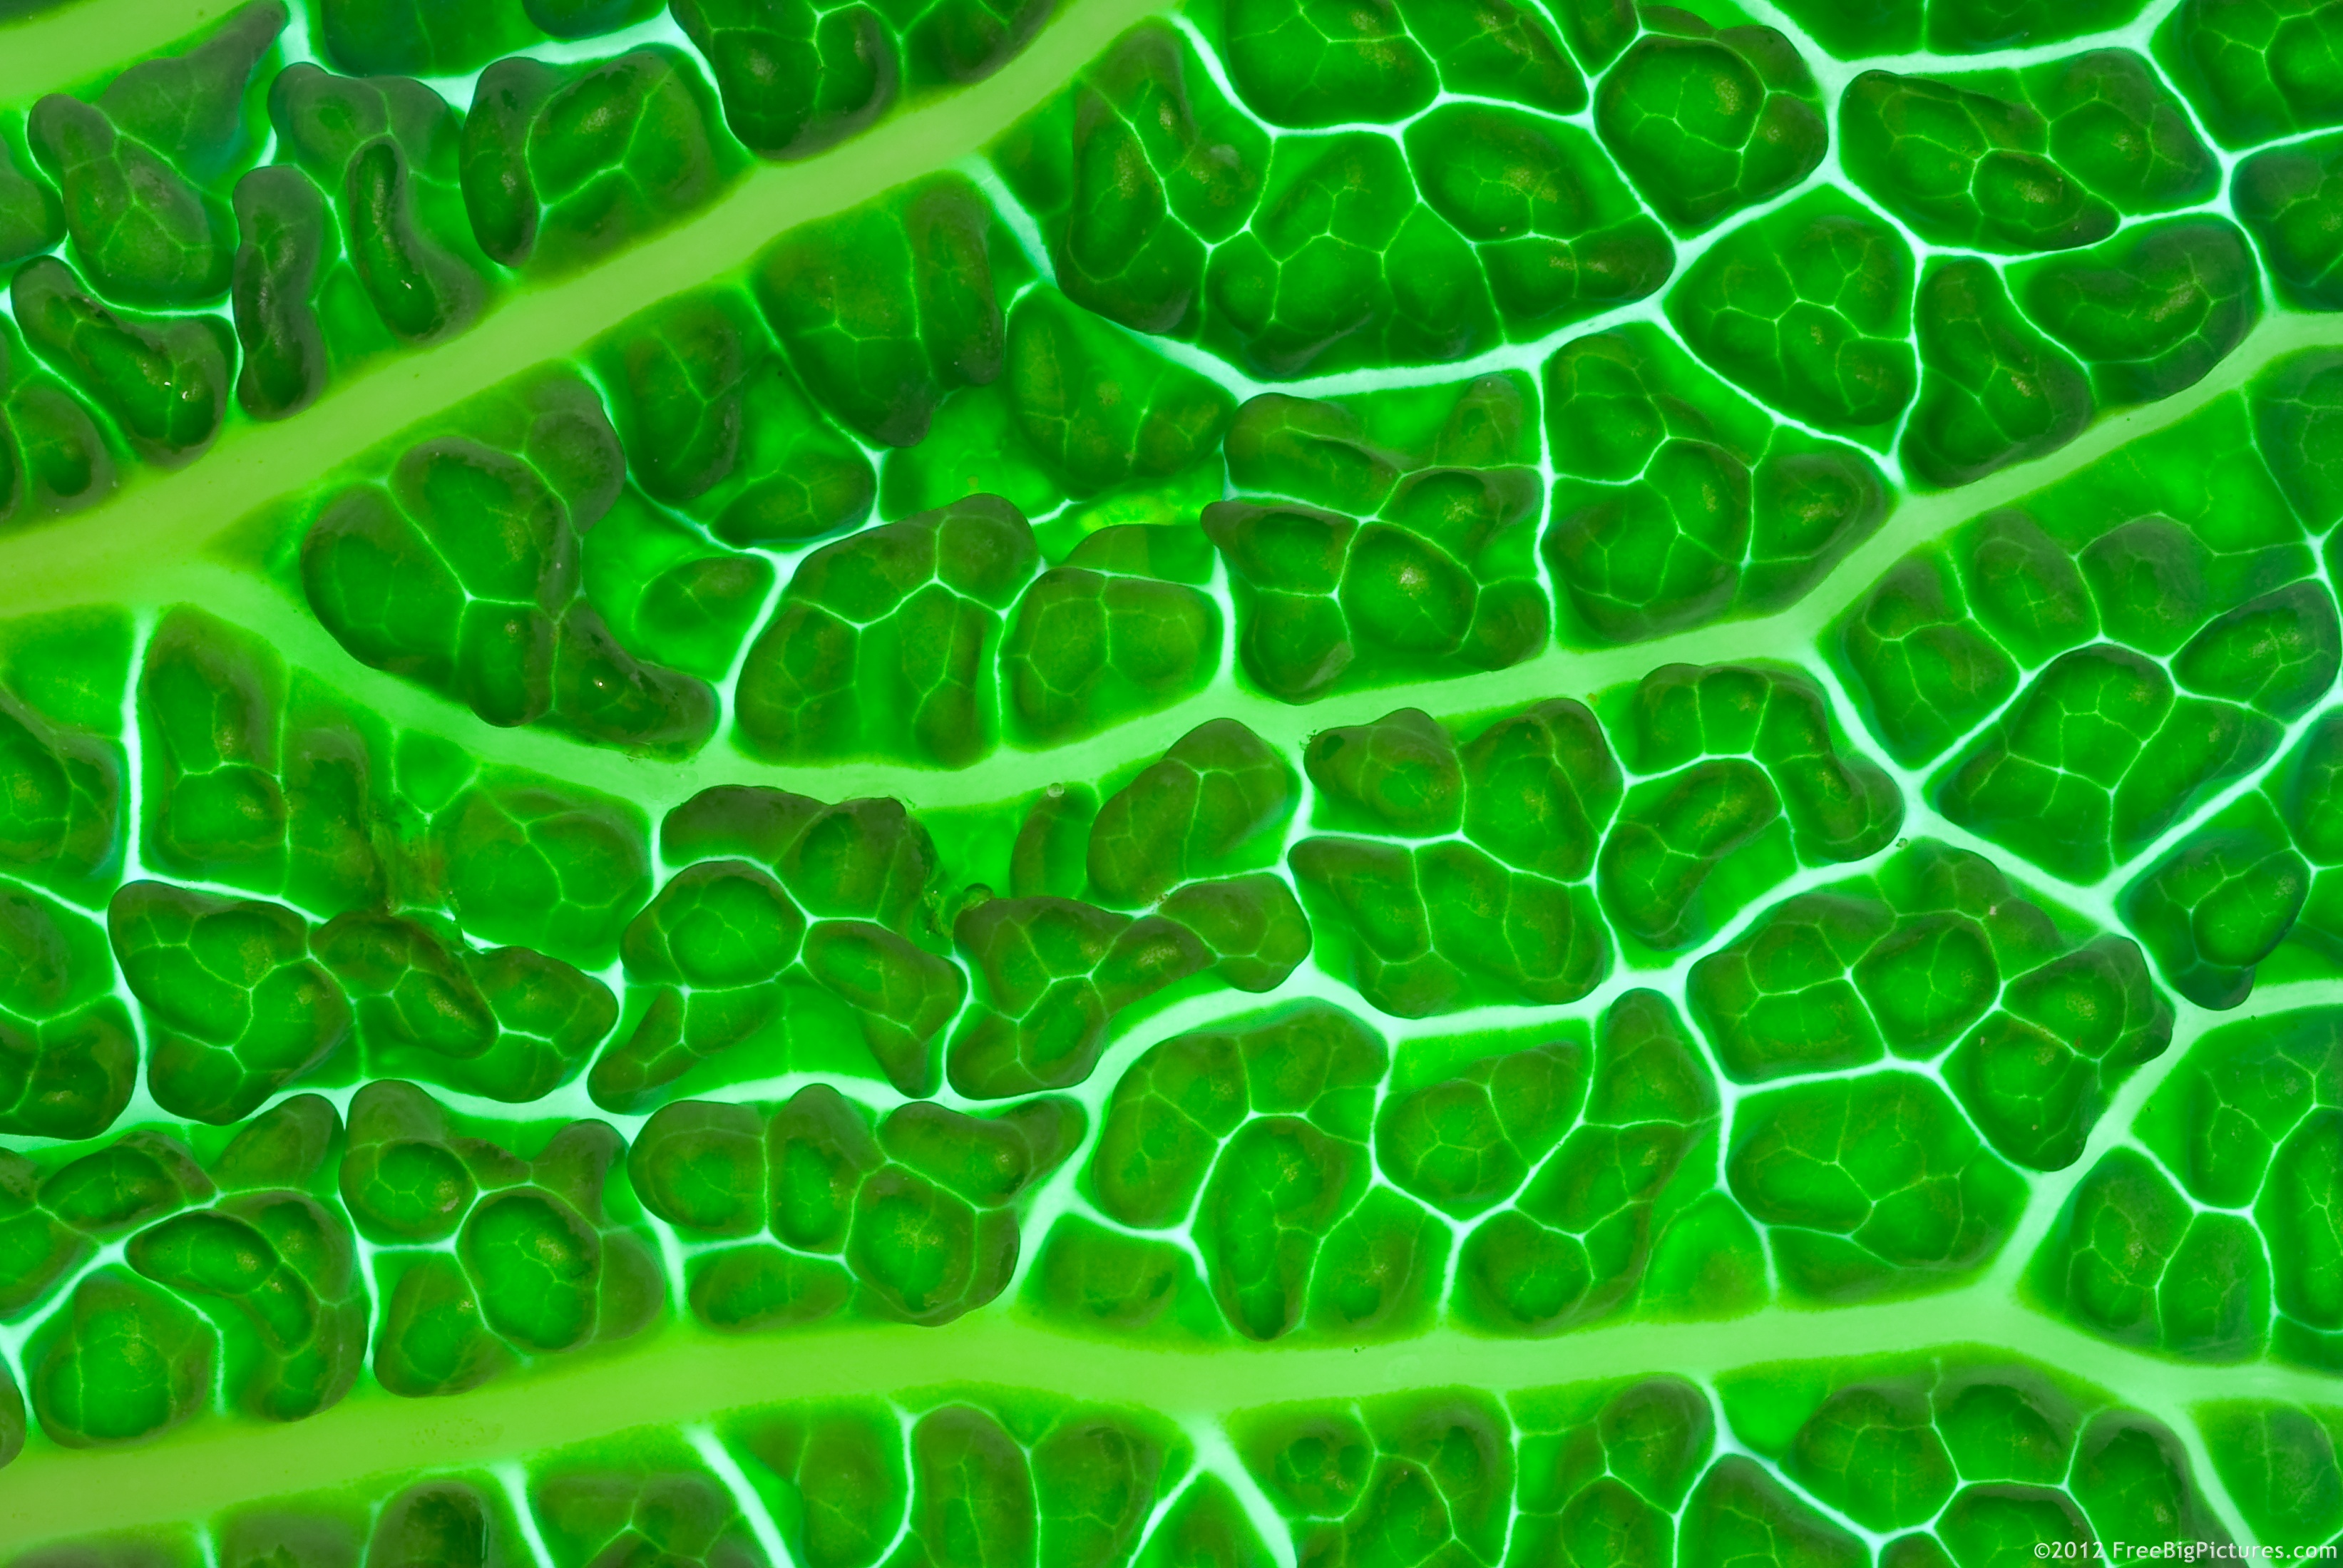 A green leaf, viewed from close up, which is crossed by plenty of yellow and white veins forming a network. Light coming from behind reveals even more details